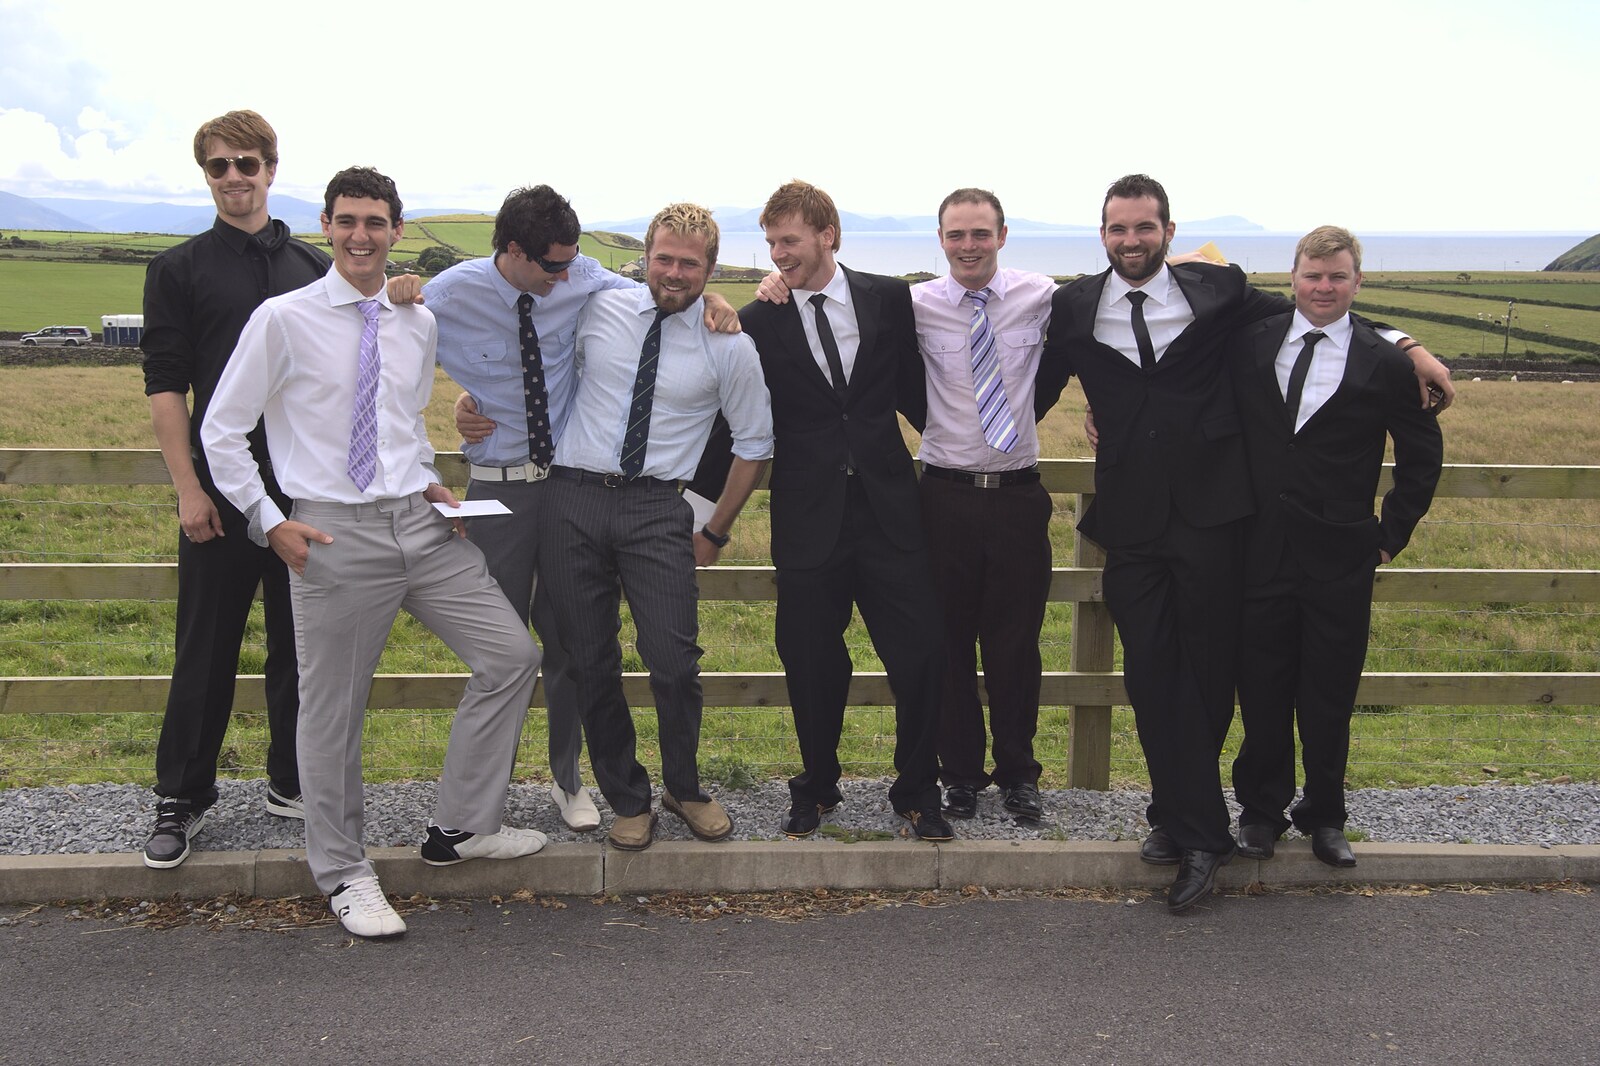 The wedding lads from Julie and Cameron's Wedding, Ballintaggart House, Dingle - 24th July 2009